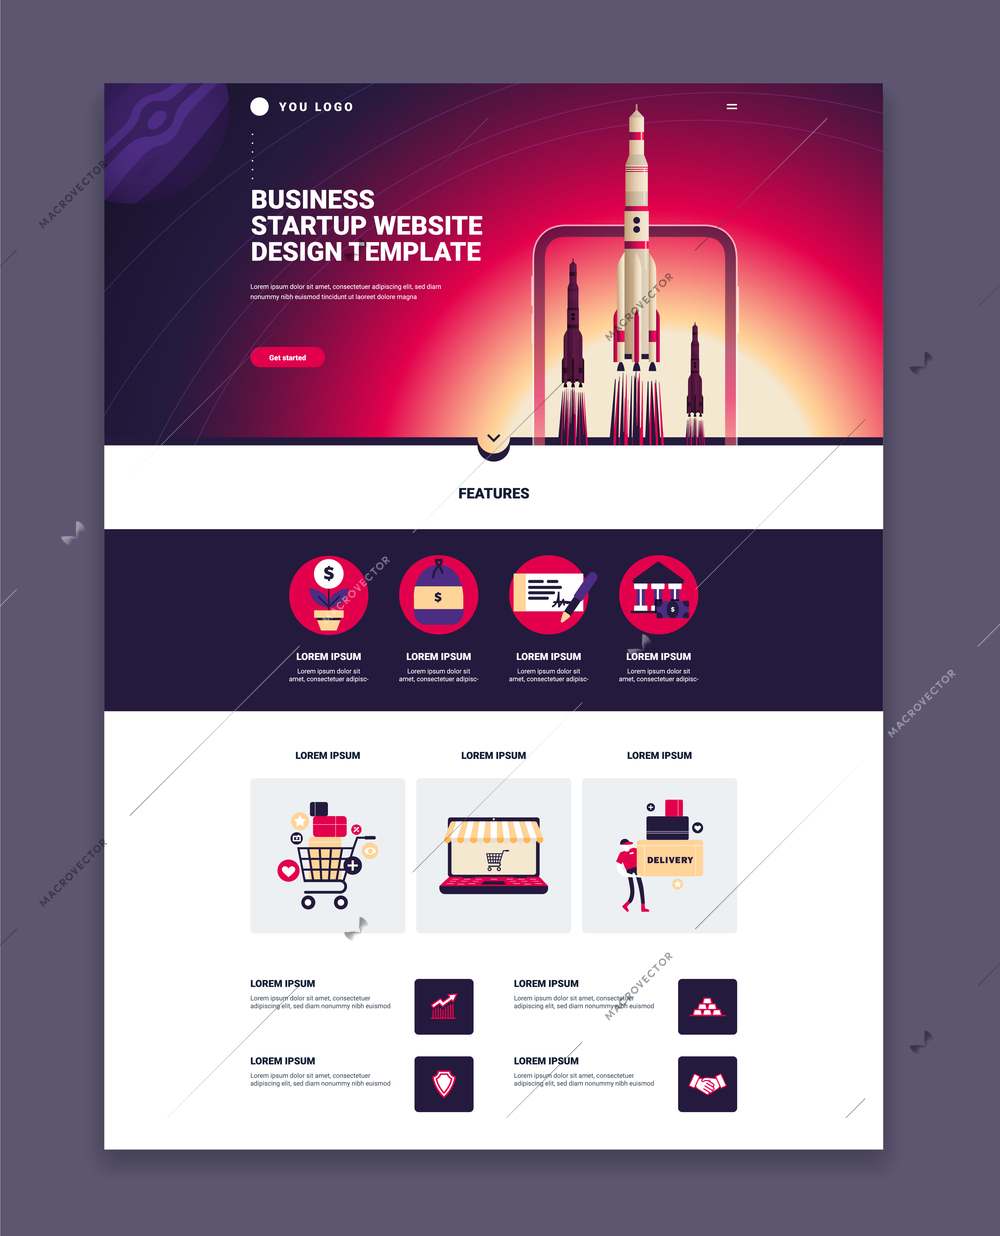 Business website page design template with three launching rockets colorful images and features flat vector illustration